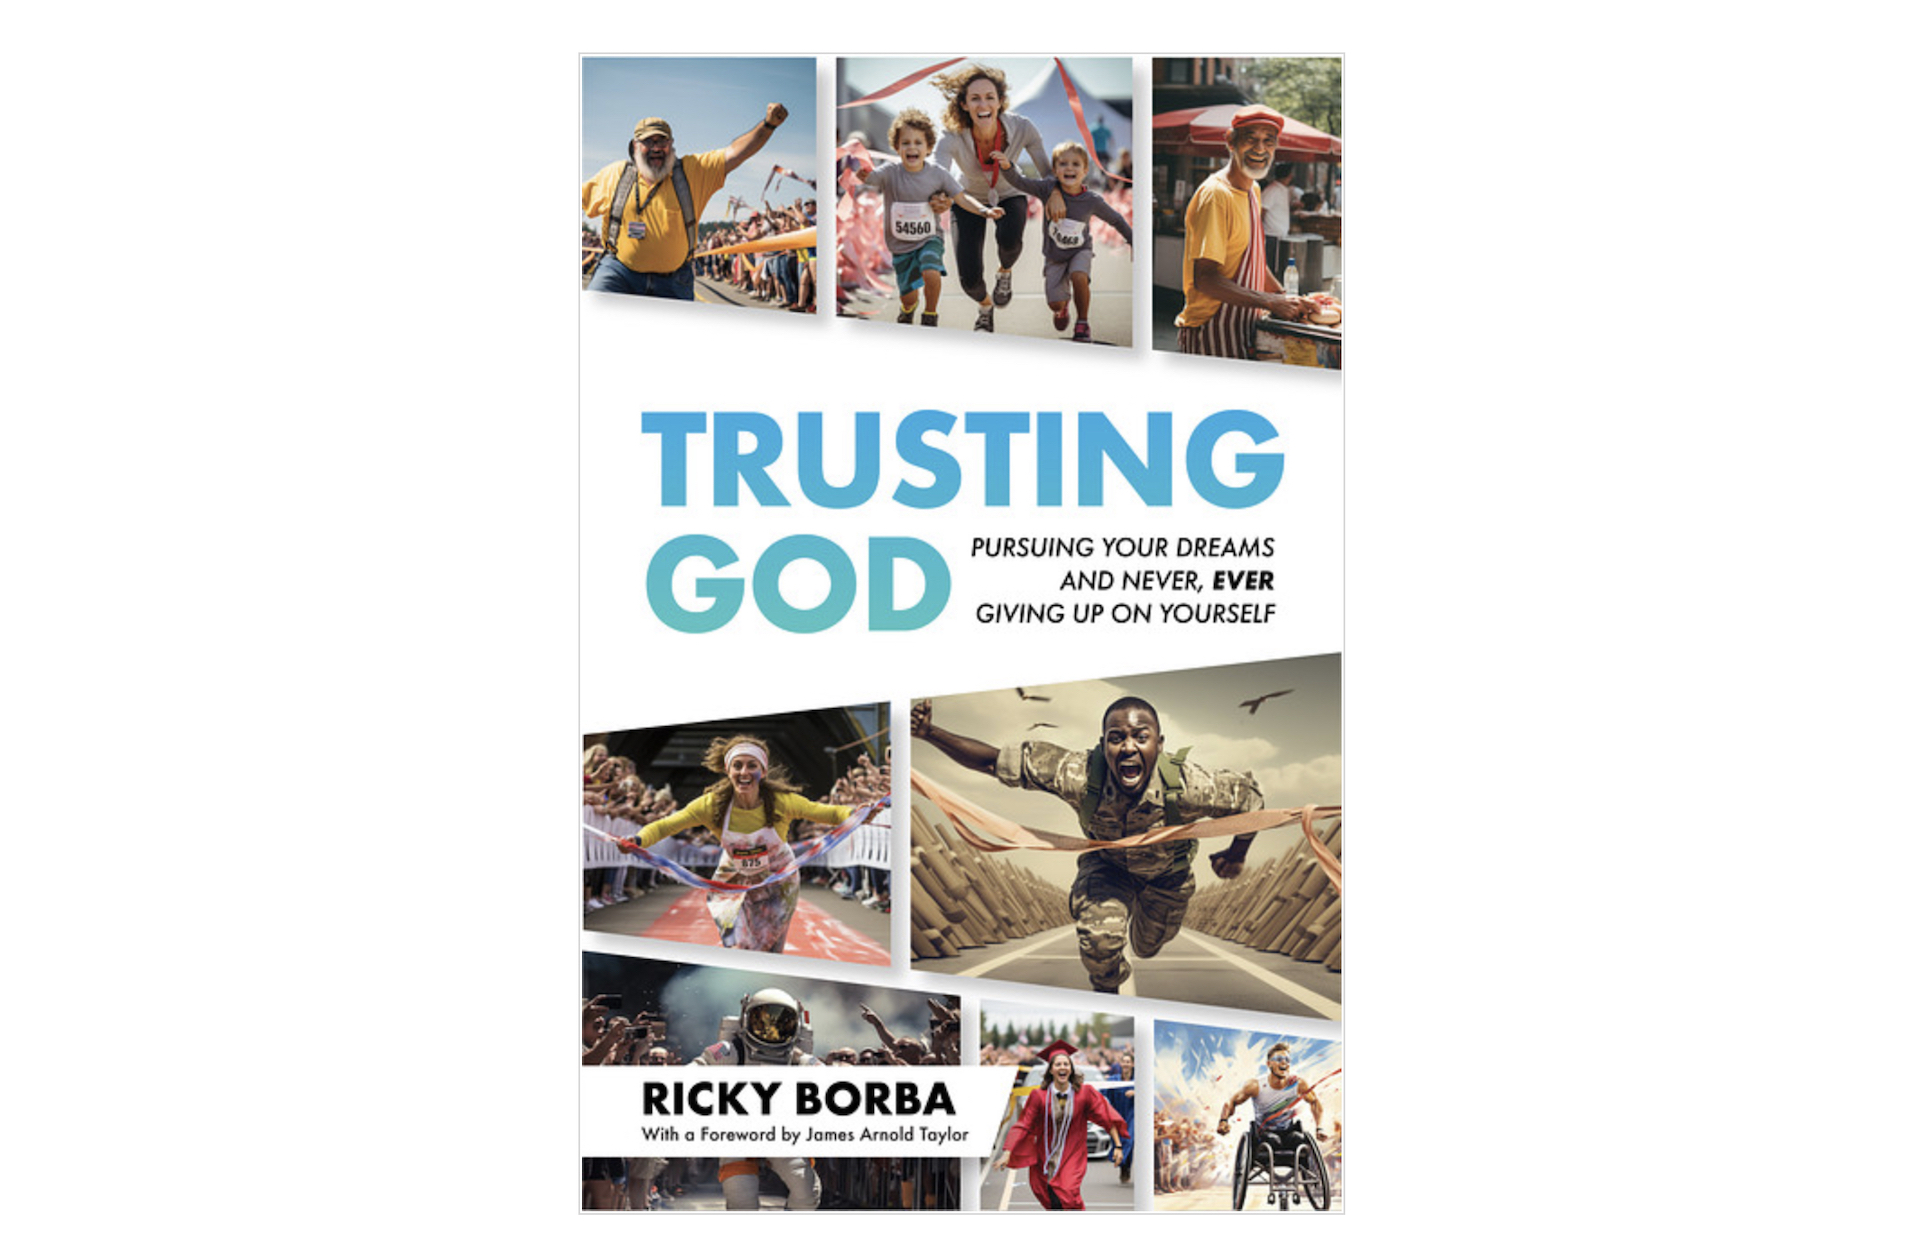 My Book – Pursuing God, Chasing Your Dreams and NEVER Giving Up On Yourself